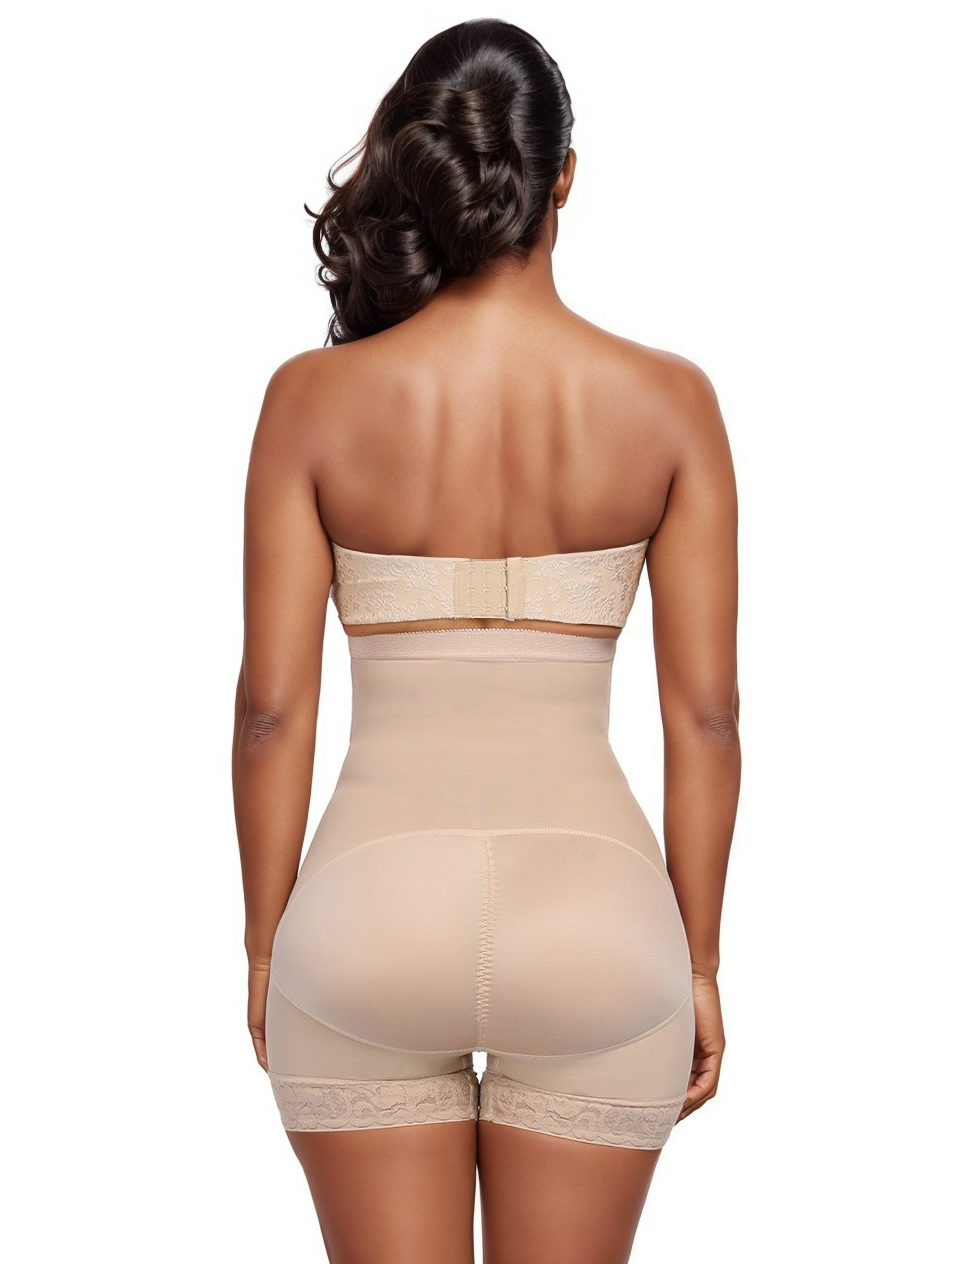 Peachy Shapewear on X: All sizes are restocked for our Backless